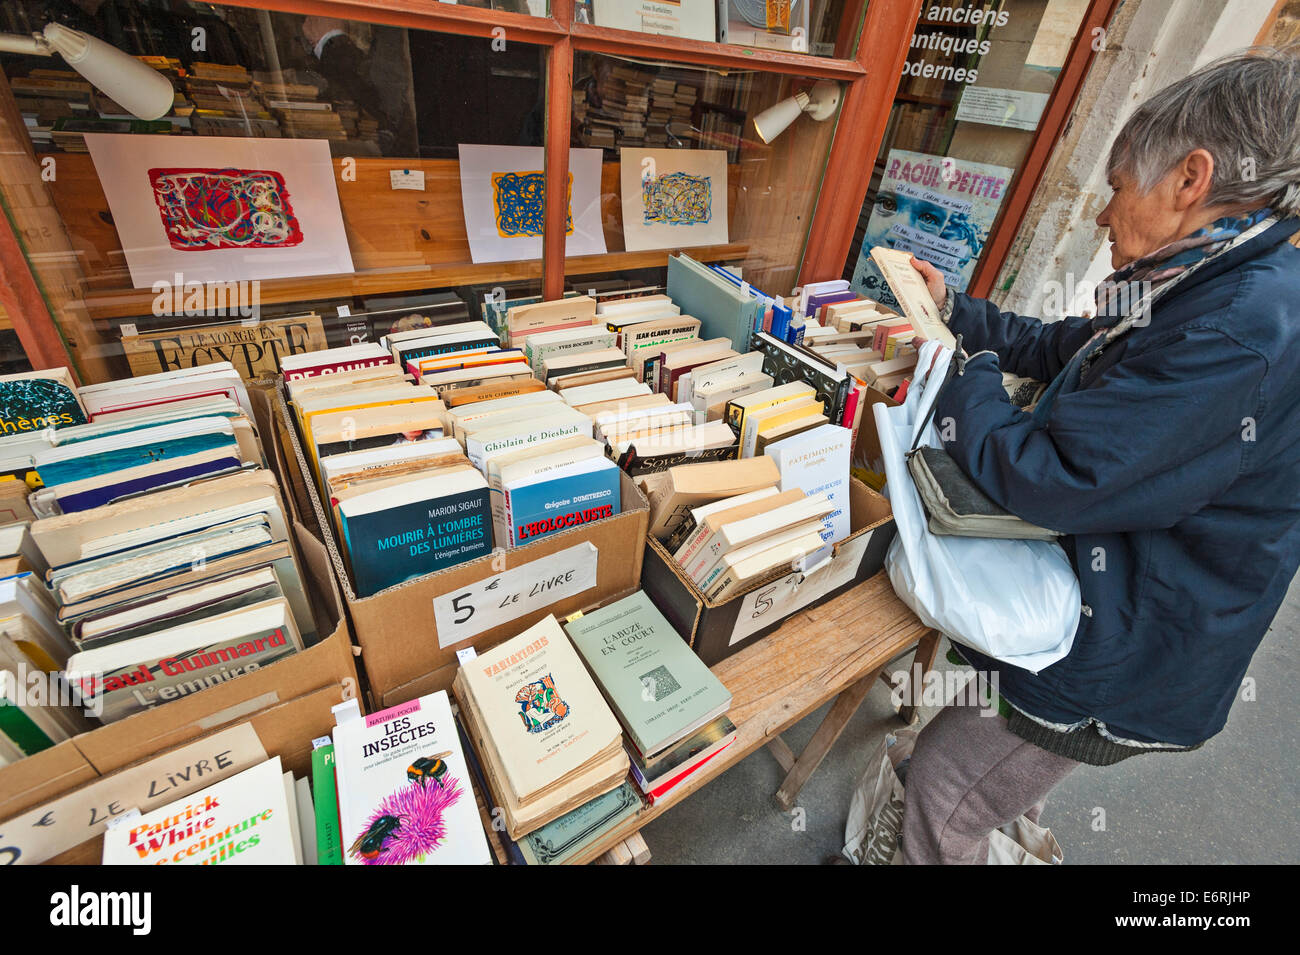 A French woman browsing through boxes of books on display in the street outside a bookseller's shop in Rousillon, France Stock Photo